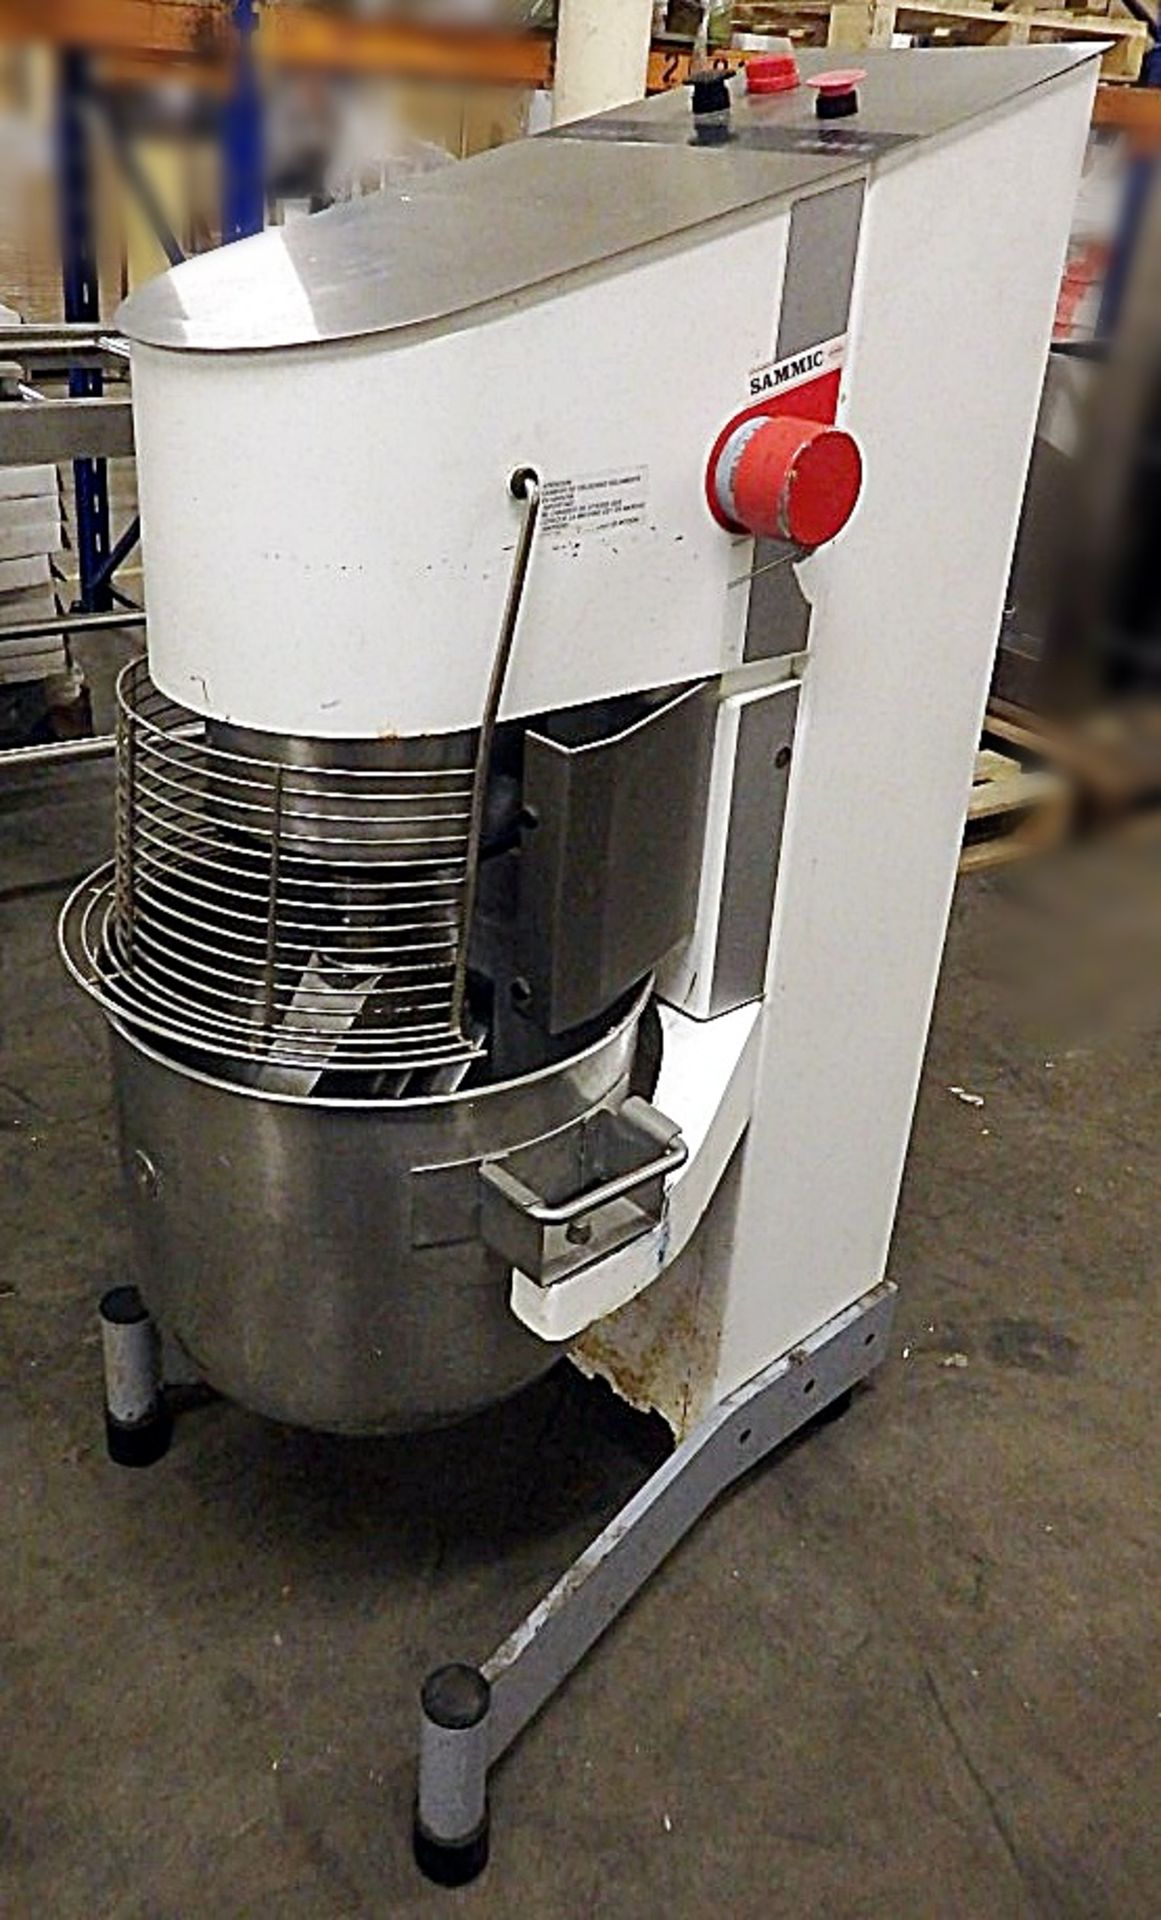 1 x Sammic Planetary Mixer With Whisk, Hook, Paddle - Presented Good Condition - Dimensions: W54 x - Image 2 of 7